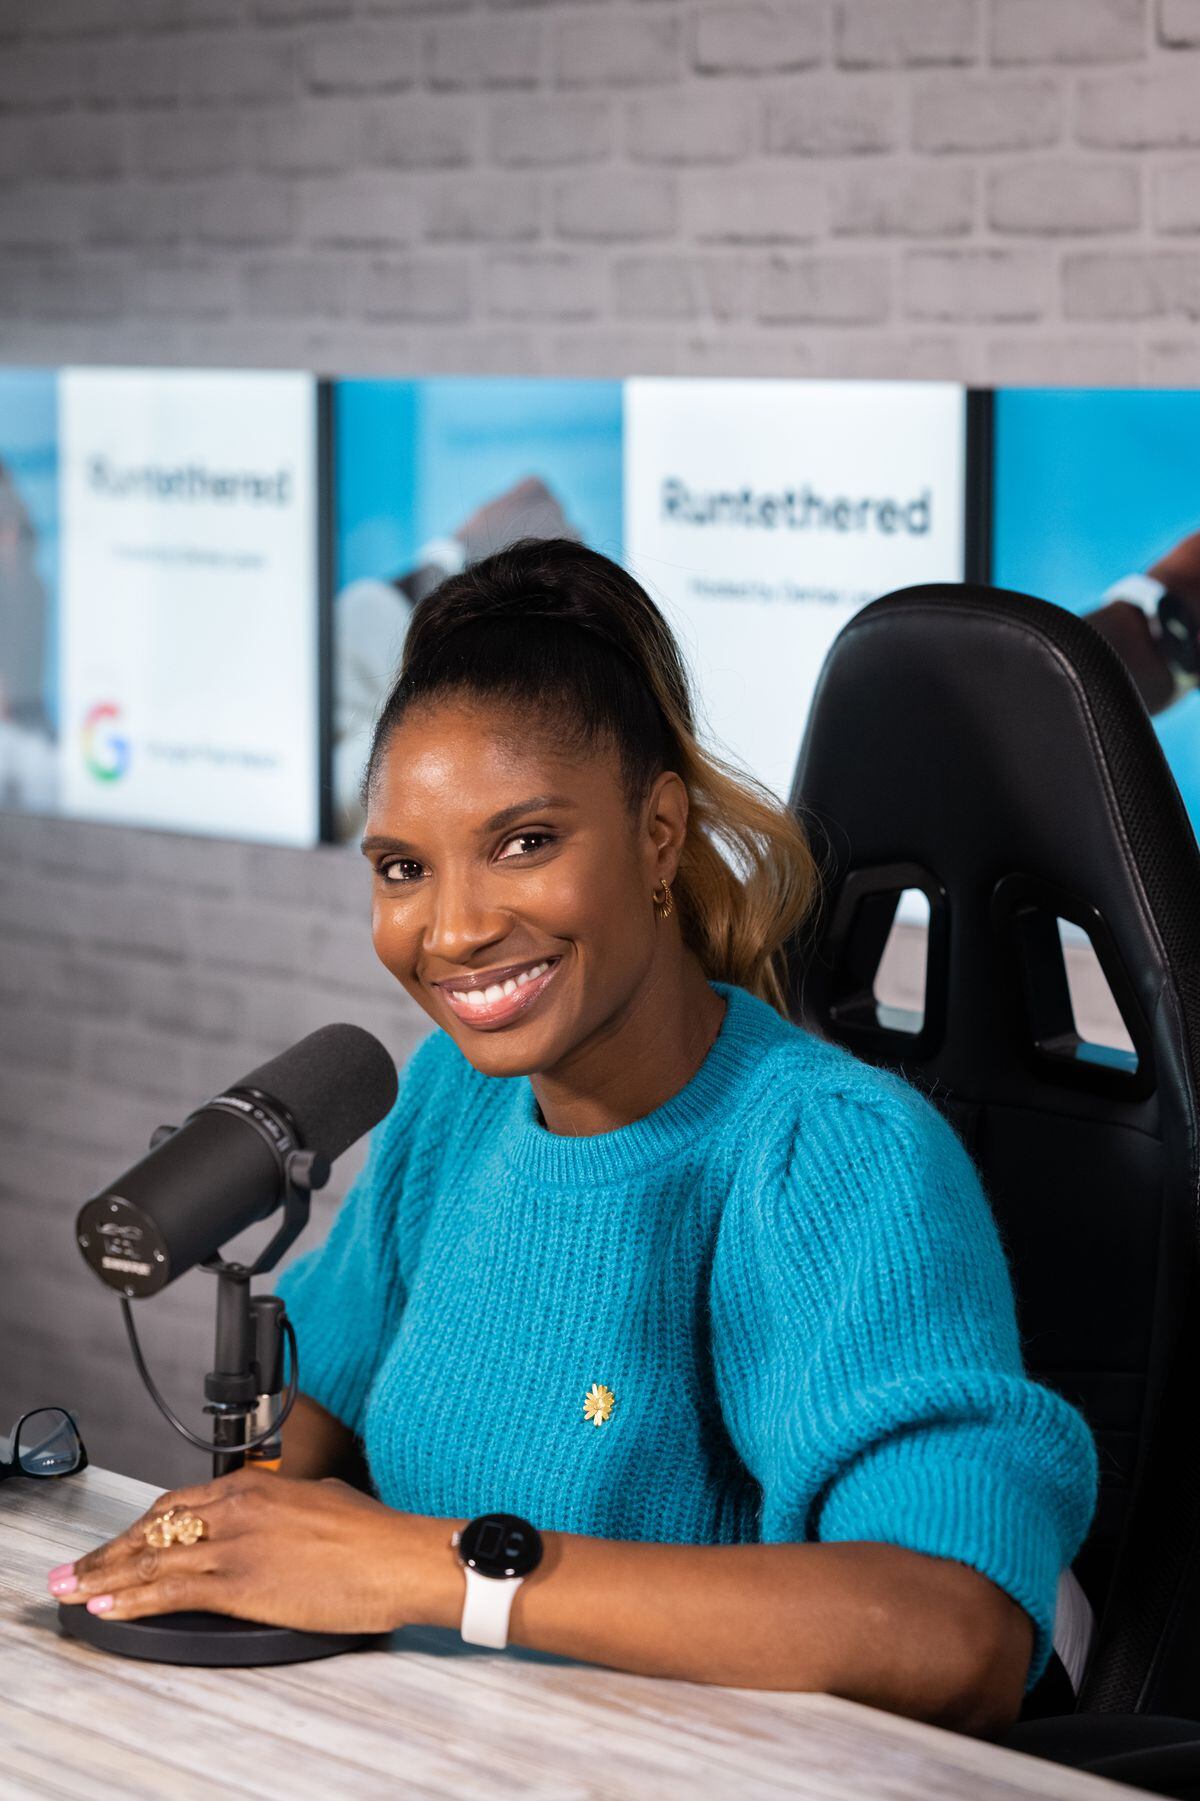 Undated Handout Photo of Denise Lewis. See PA Feature WELLBEING Denise Lewis. Picture credit should read: PA Photo/Blake Ezra. WARNING: This picture must only be used to accompany PA Feature WELLBEING Denise Lewis.